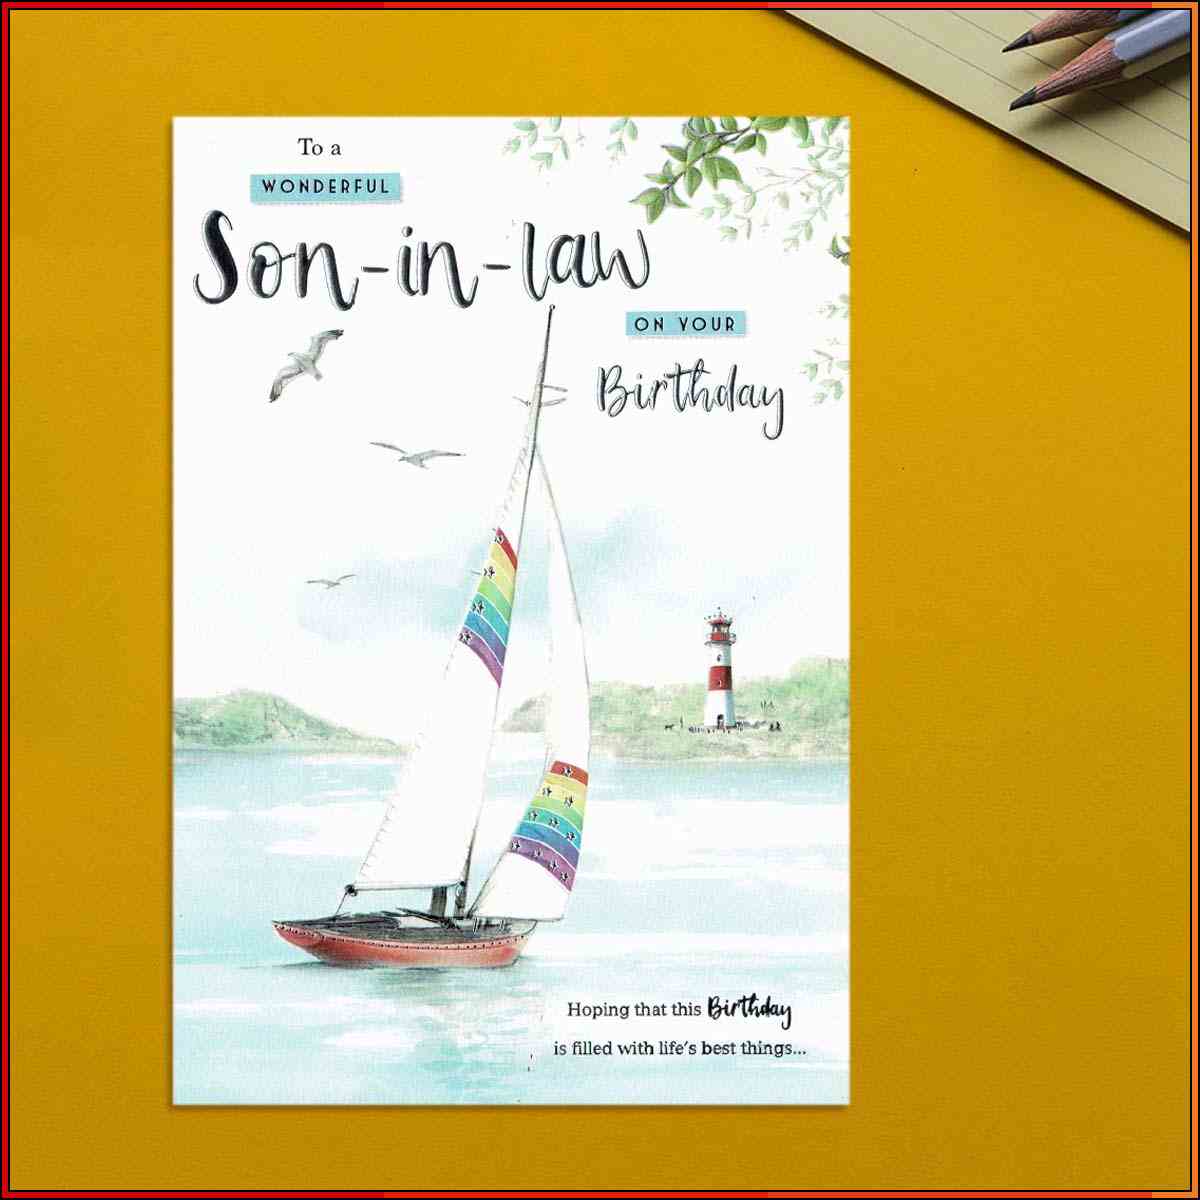 birthday wishes to son in law images
